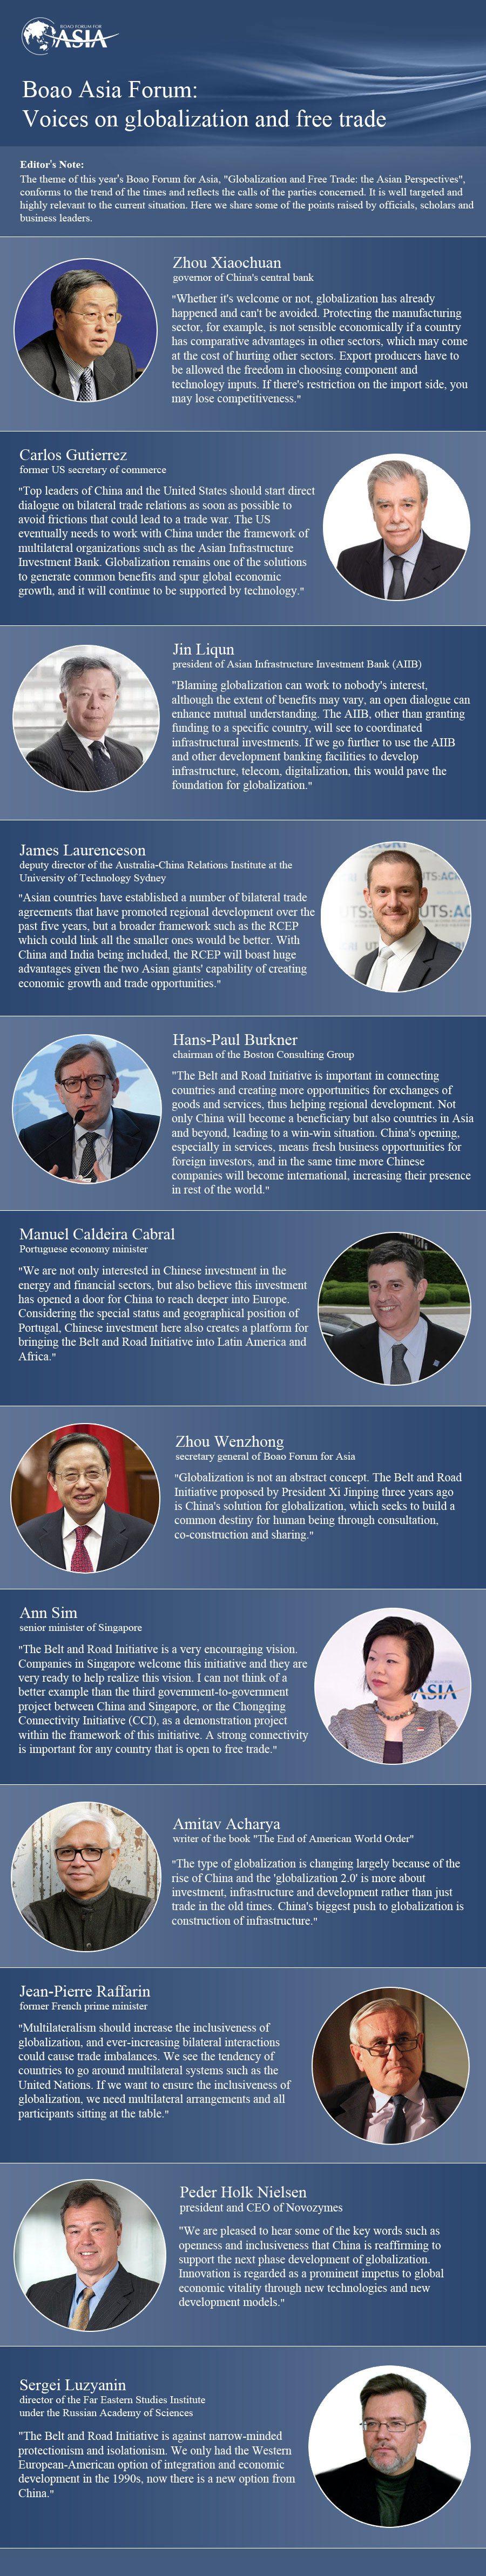 Boao Asia Forum: Voices on globalization and free trade